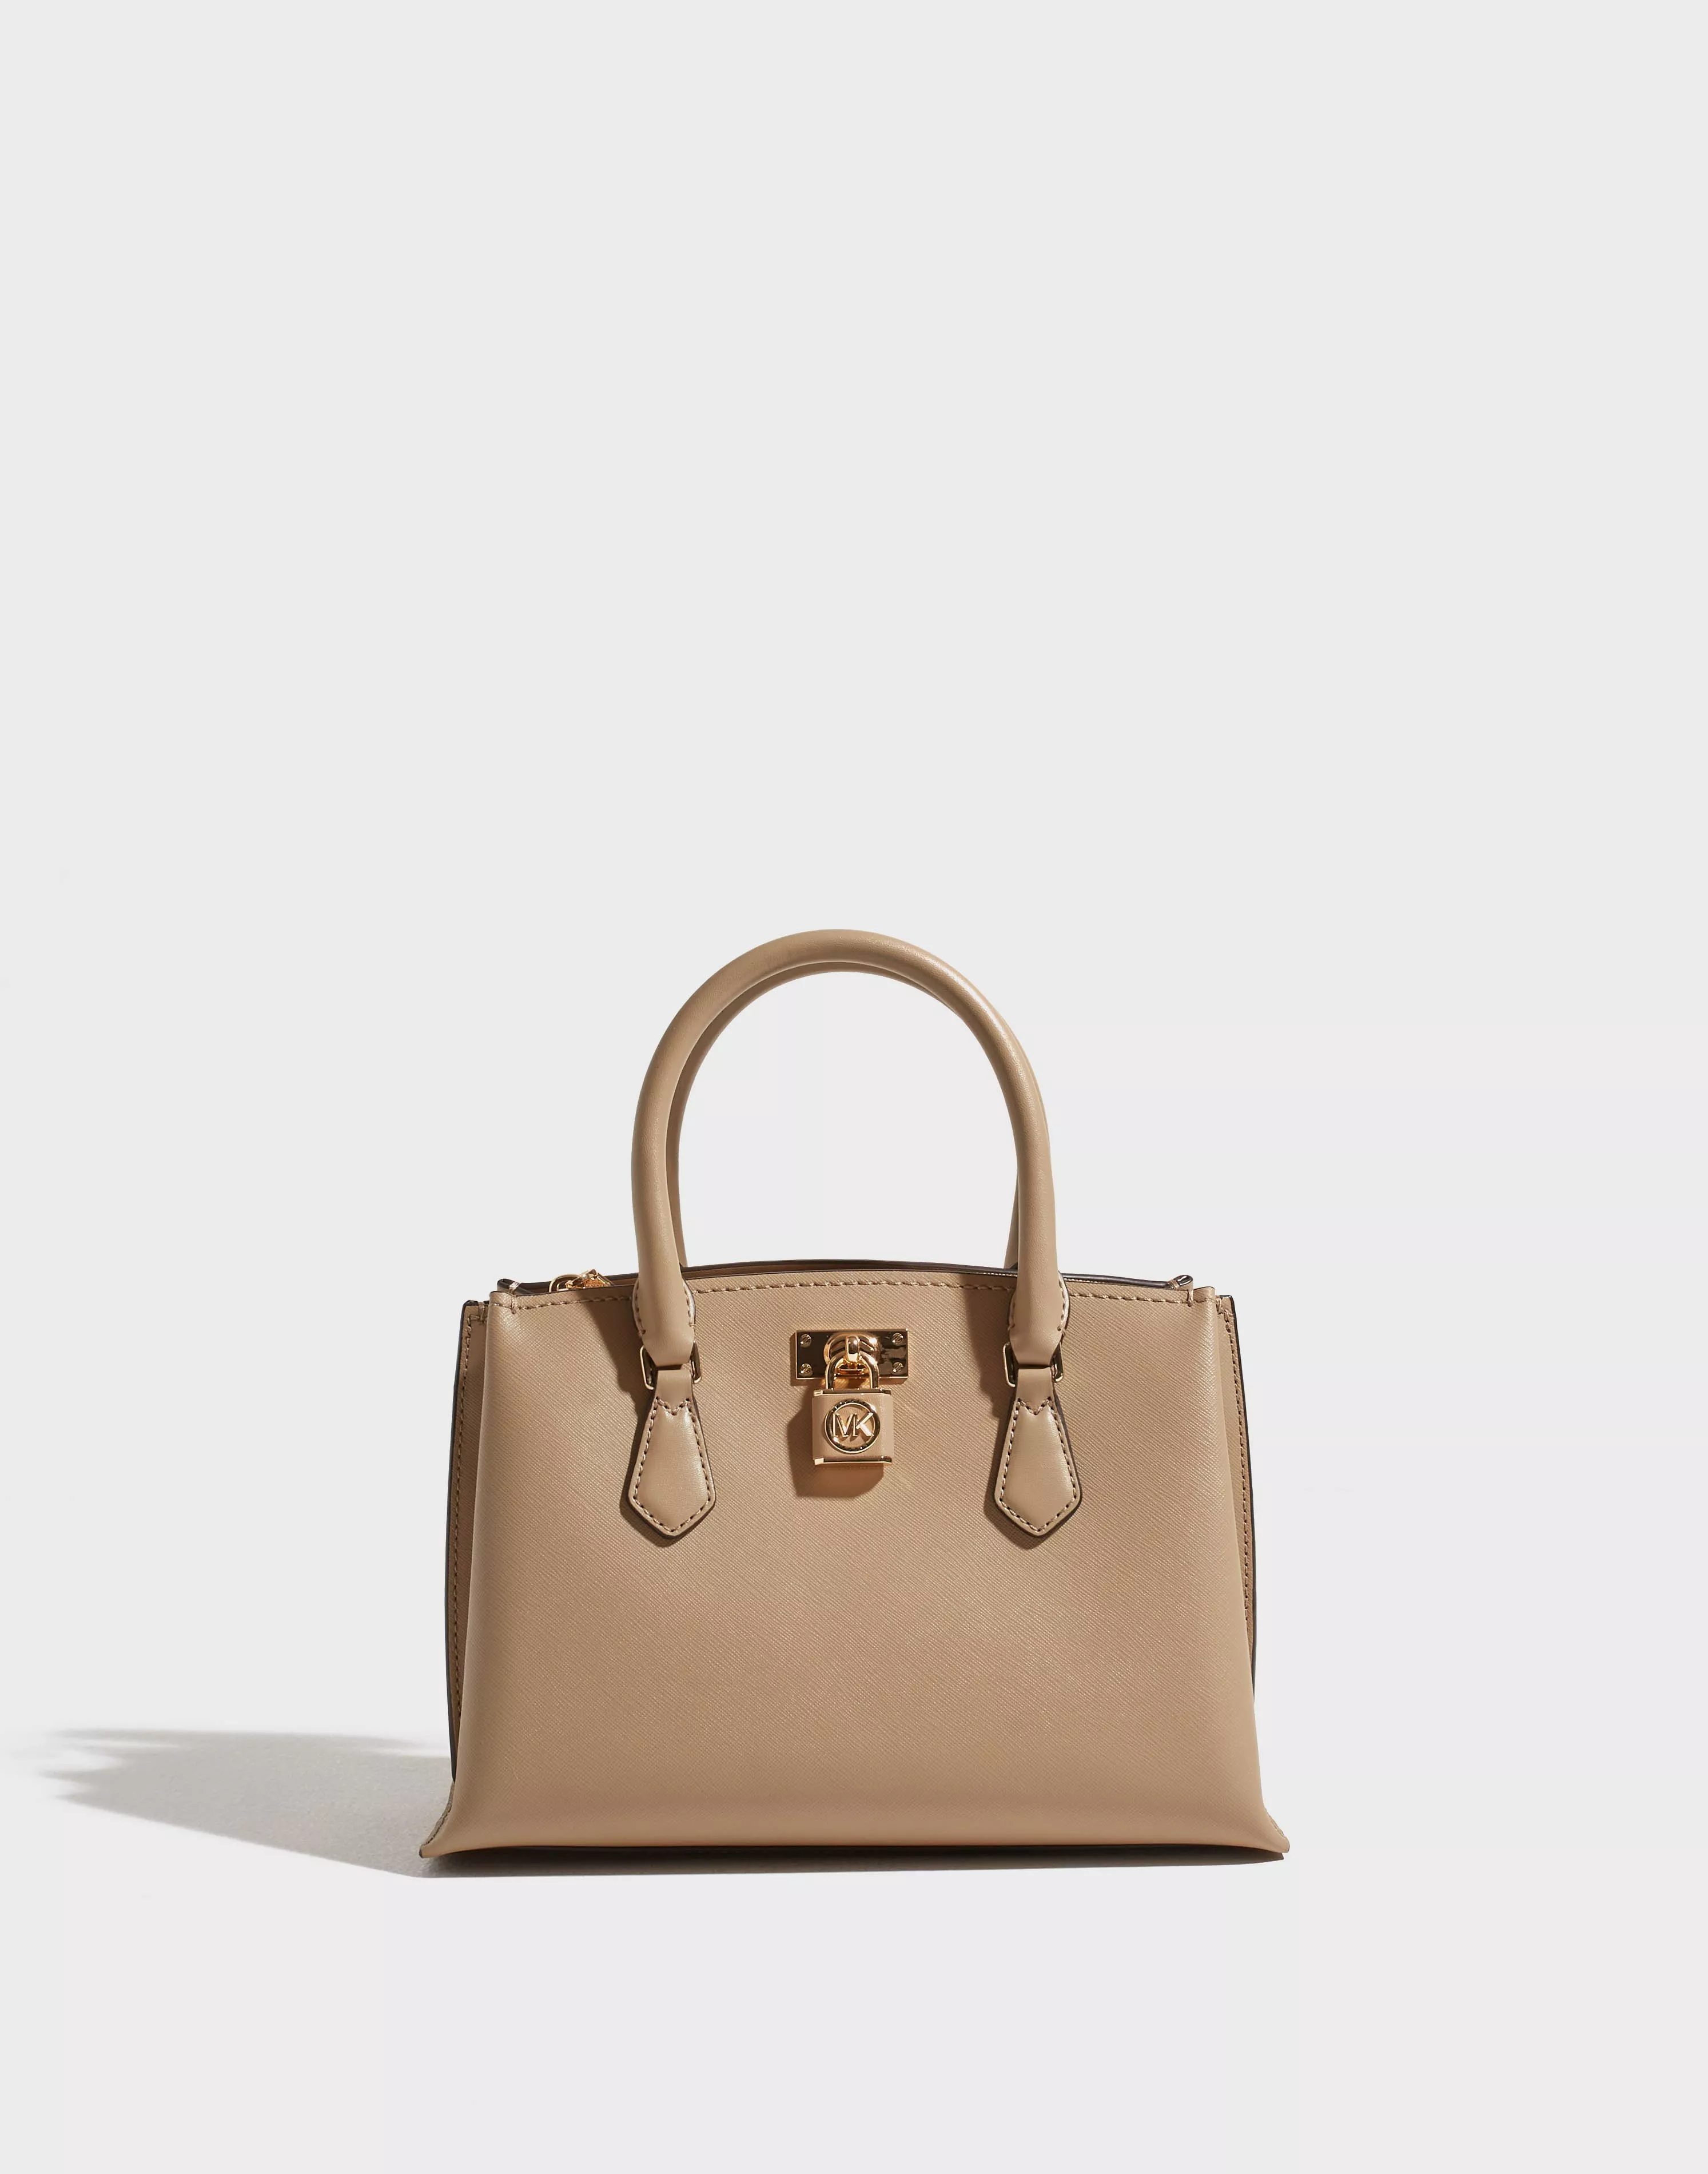 MICHAEL Michael Kors Ruby Large Saffiano Leather Tote Bag in Brown